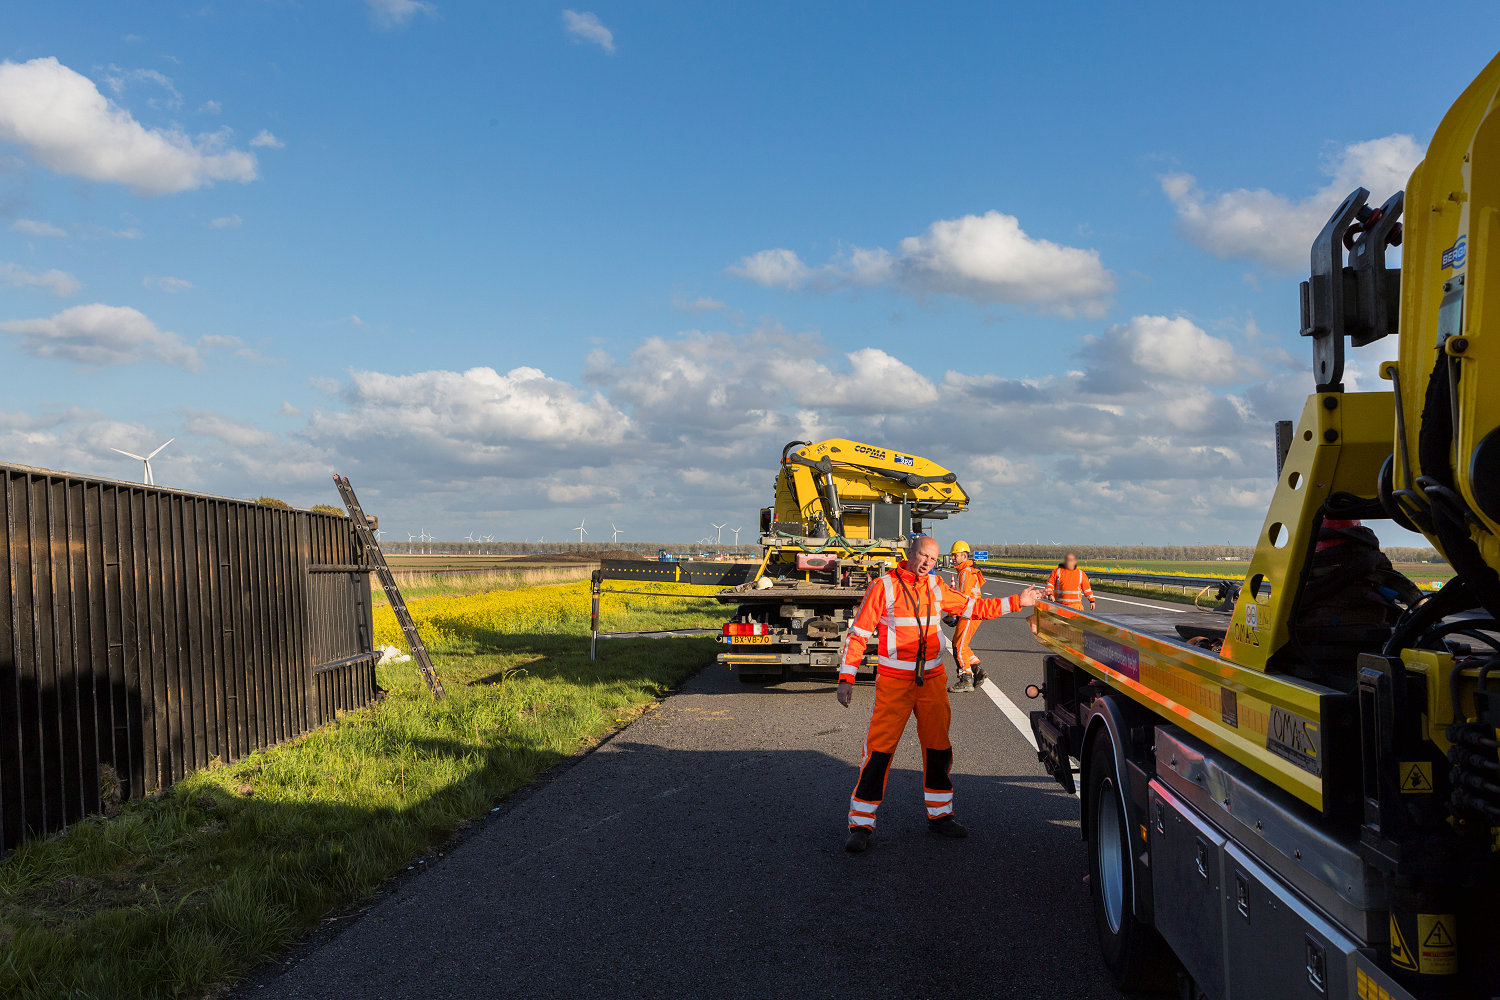 Floris Stalenhoef of Bergnet working for the Central Goods-Vehicle Reporting Point on the A27 at Almere, 5 May 2021